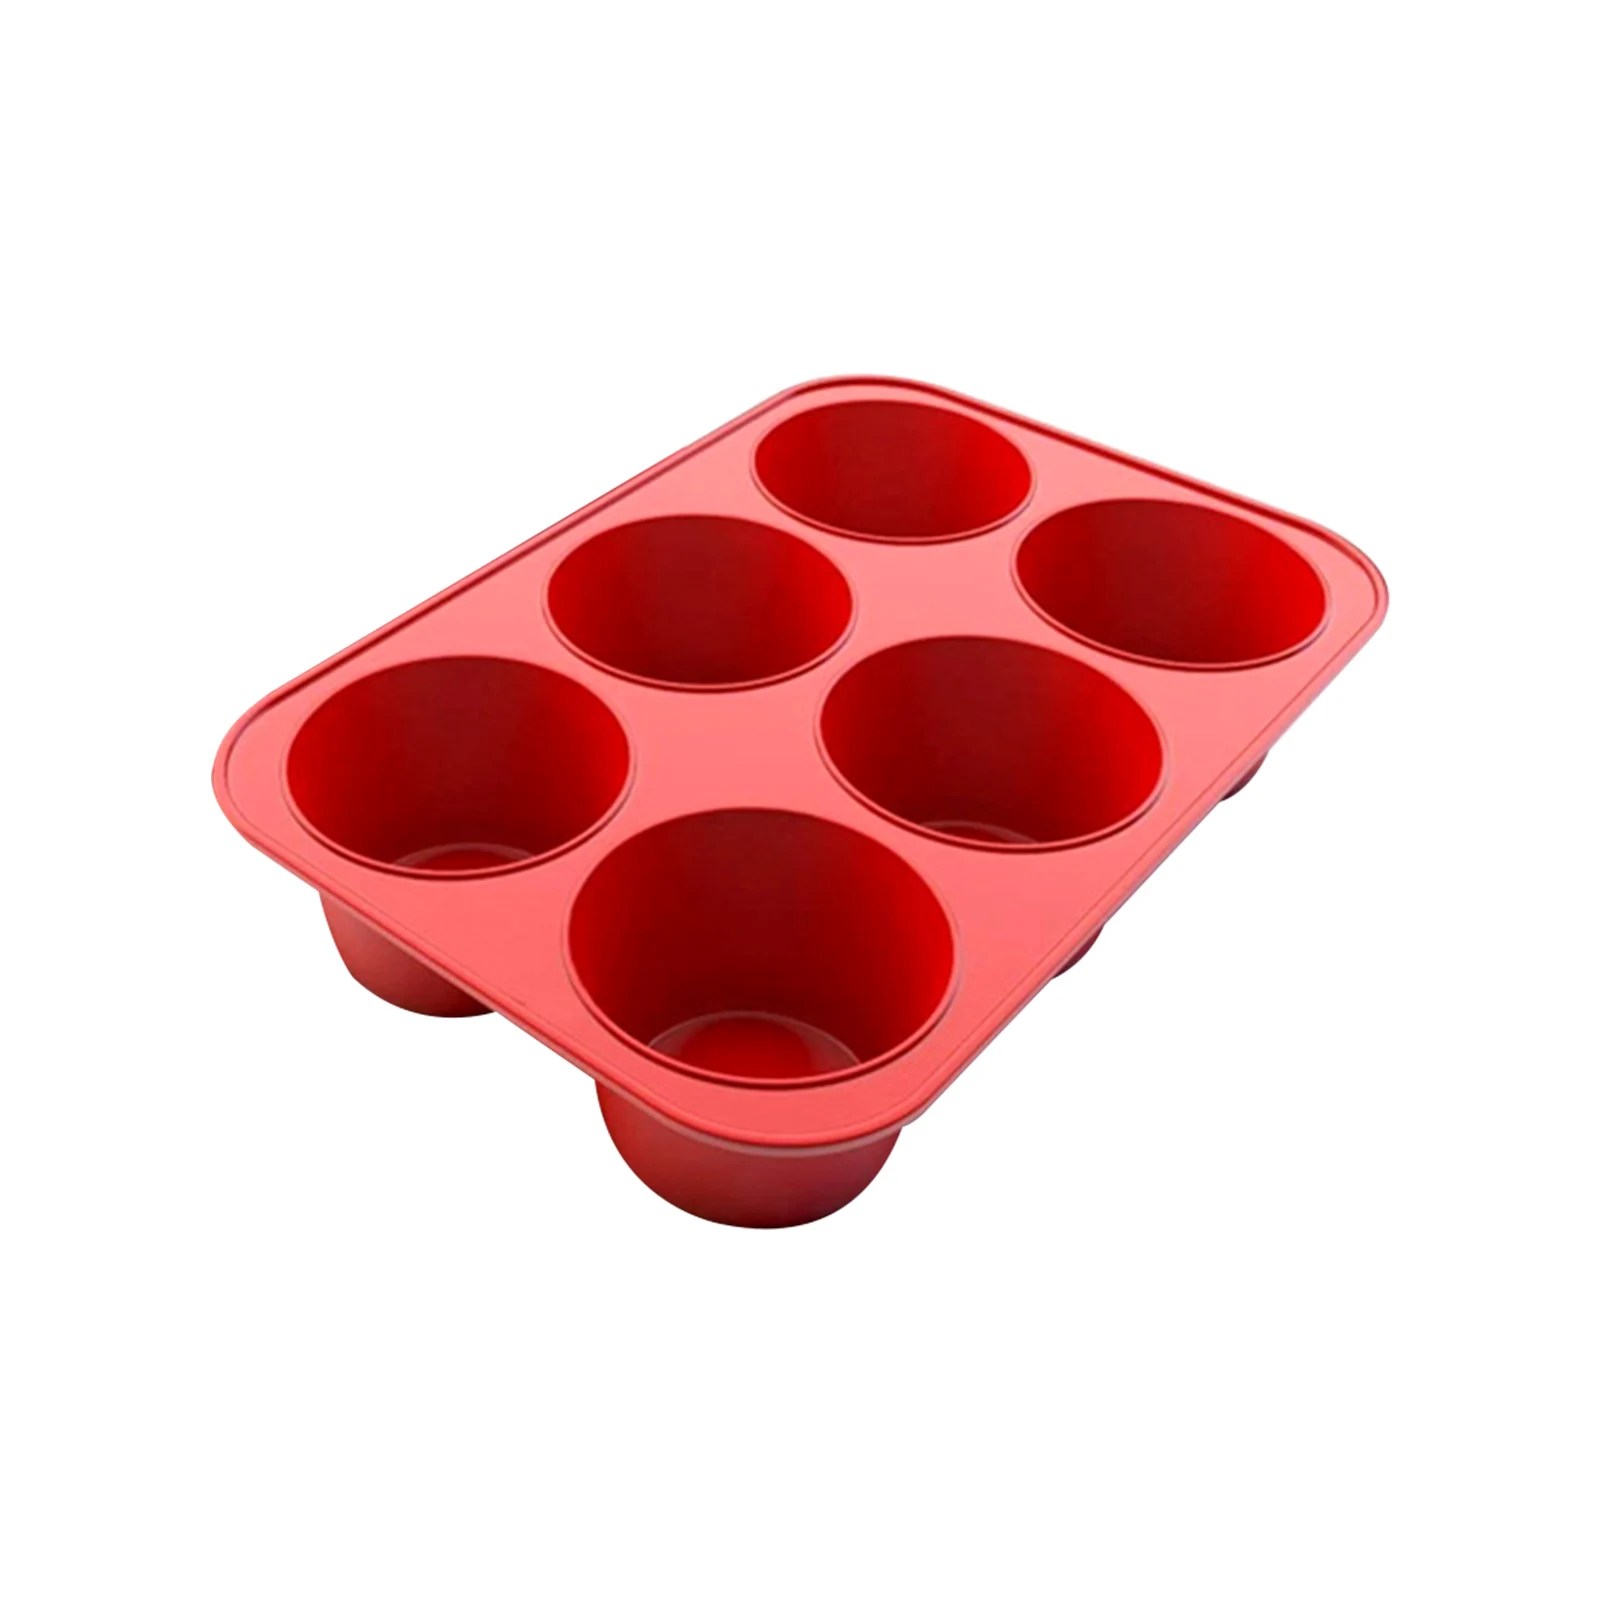 

Kitchen Cupcake Tin Deep Silicone Mold Yorkshire Pudding Non Stick Easy Clean For Baking DIY Bakeware Tool 6 Cup Muffin Tray